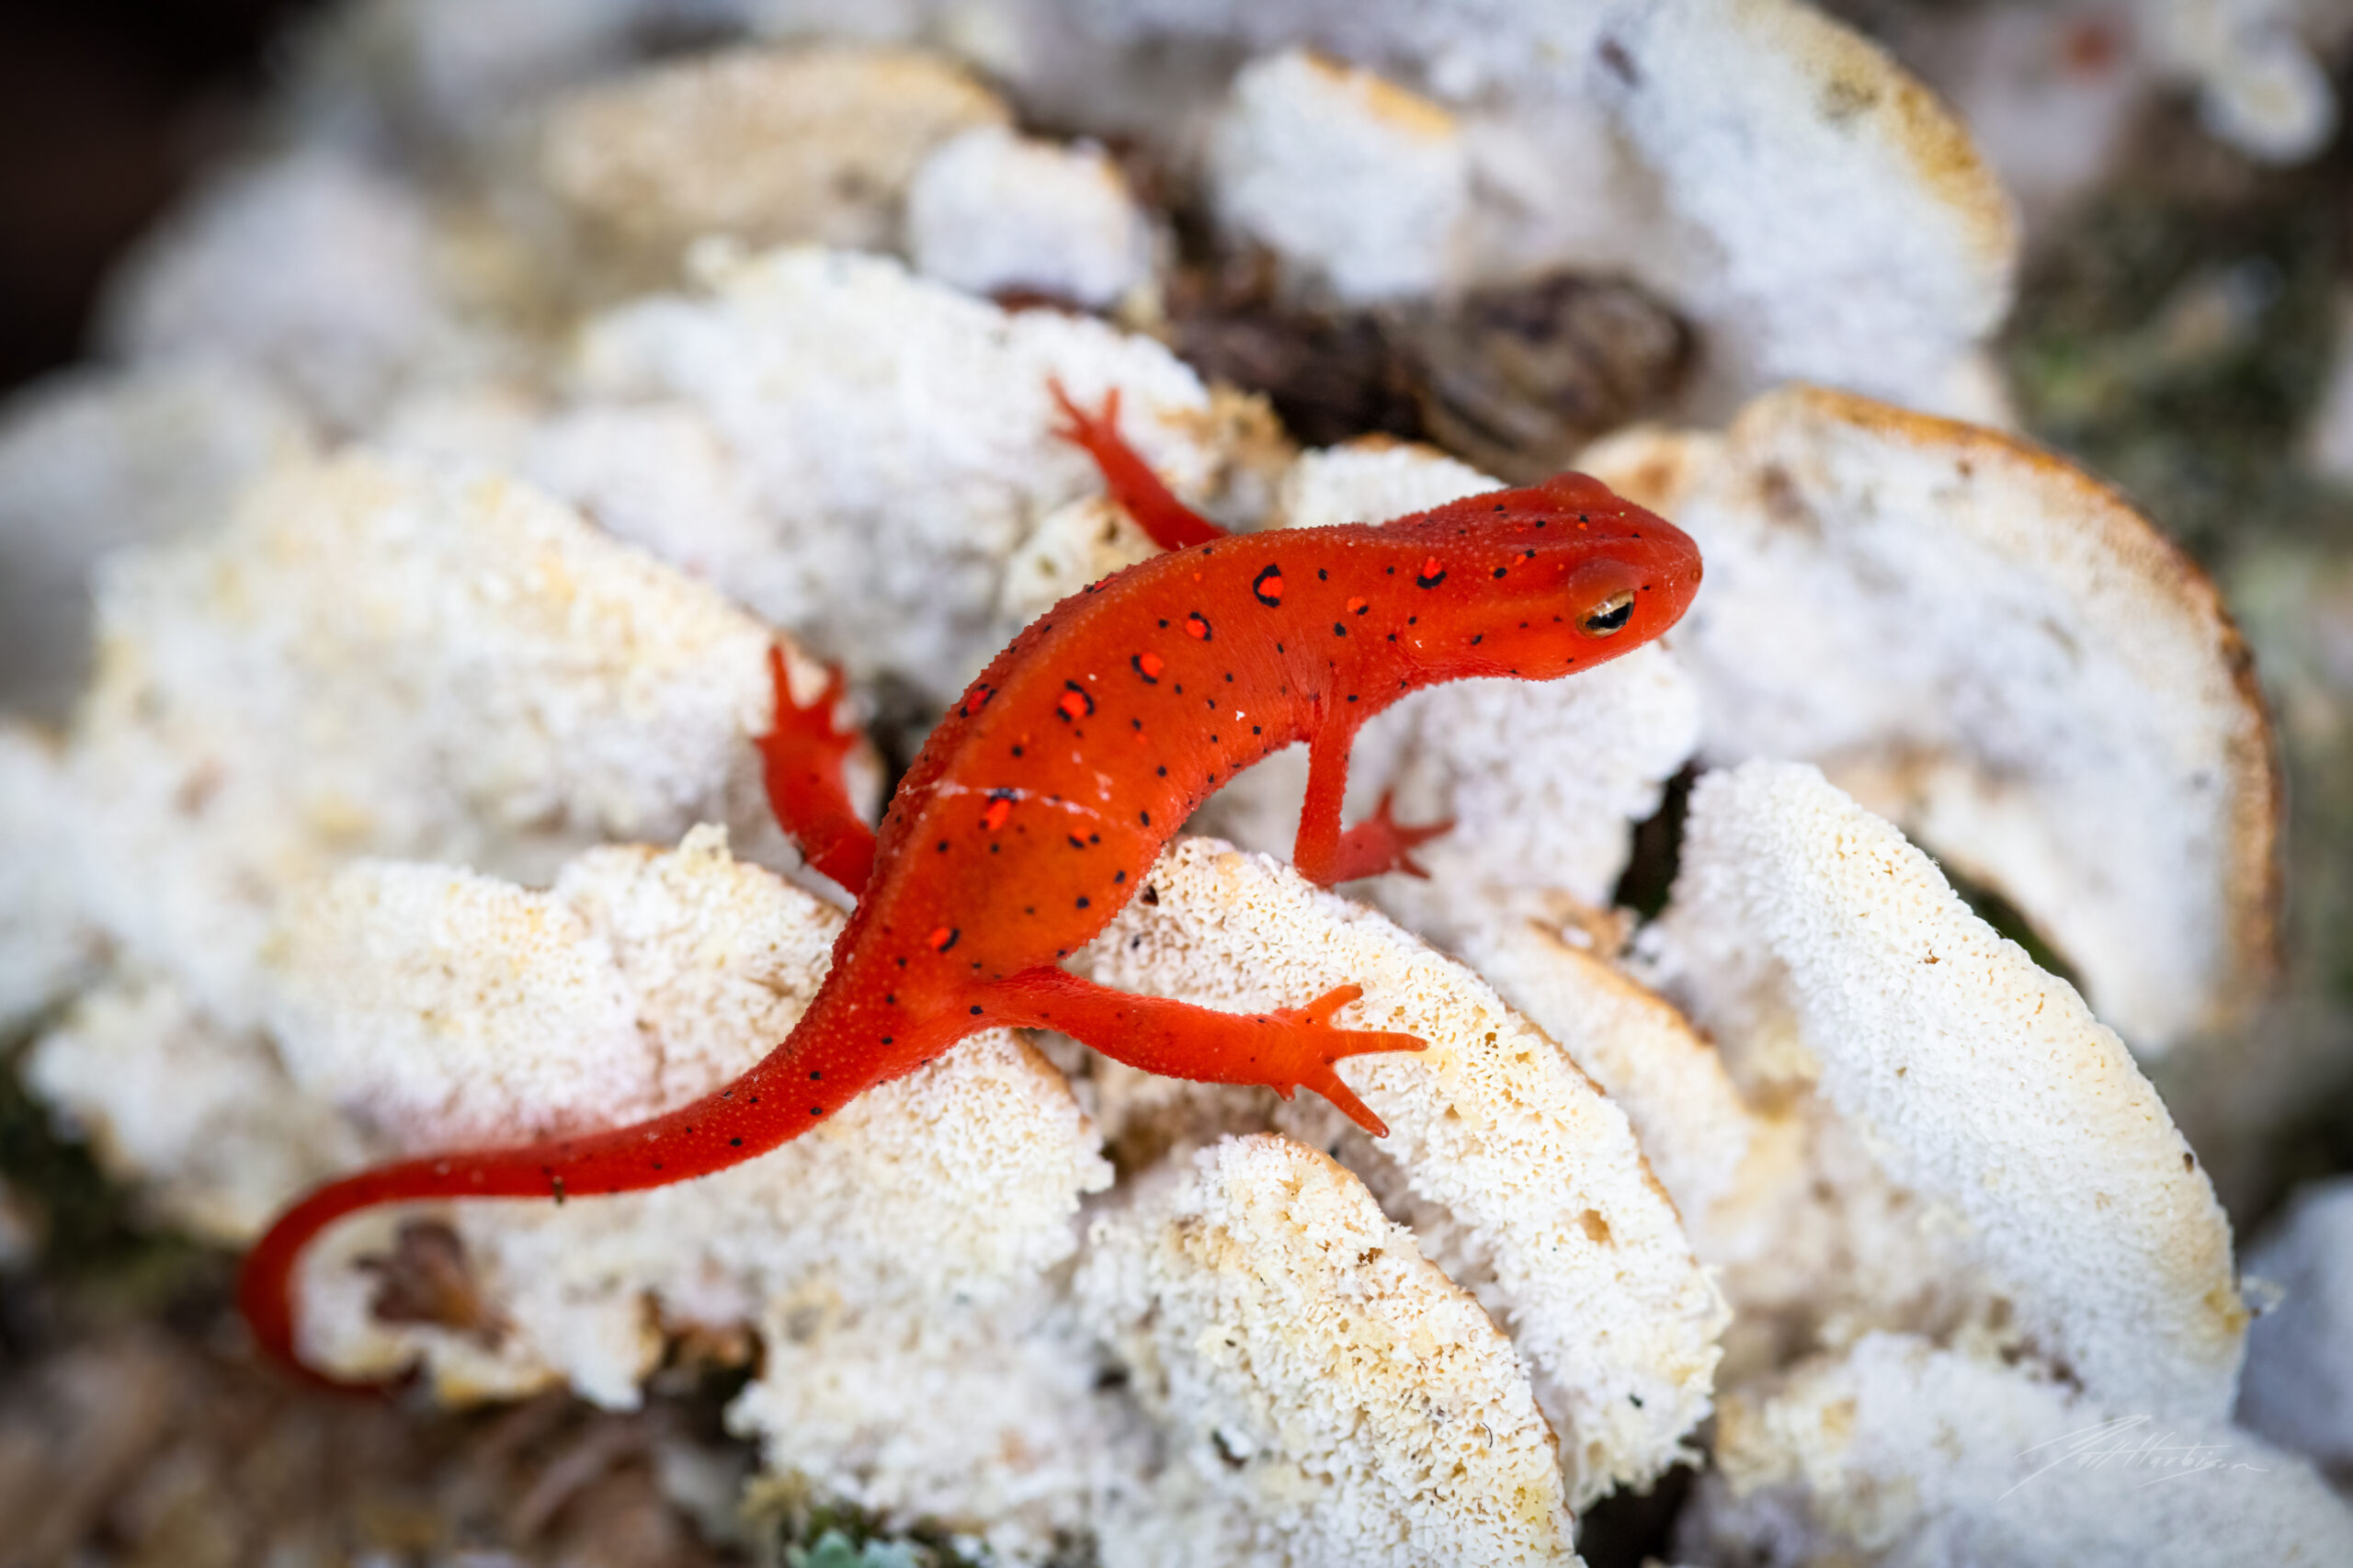 The unken reflex as displayed by an Eastern red-spotted newt.